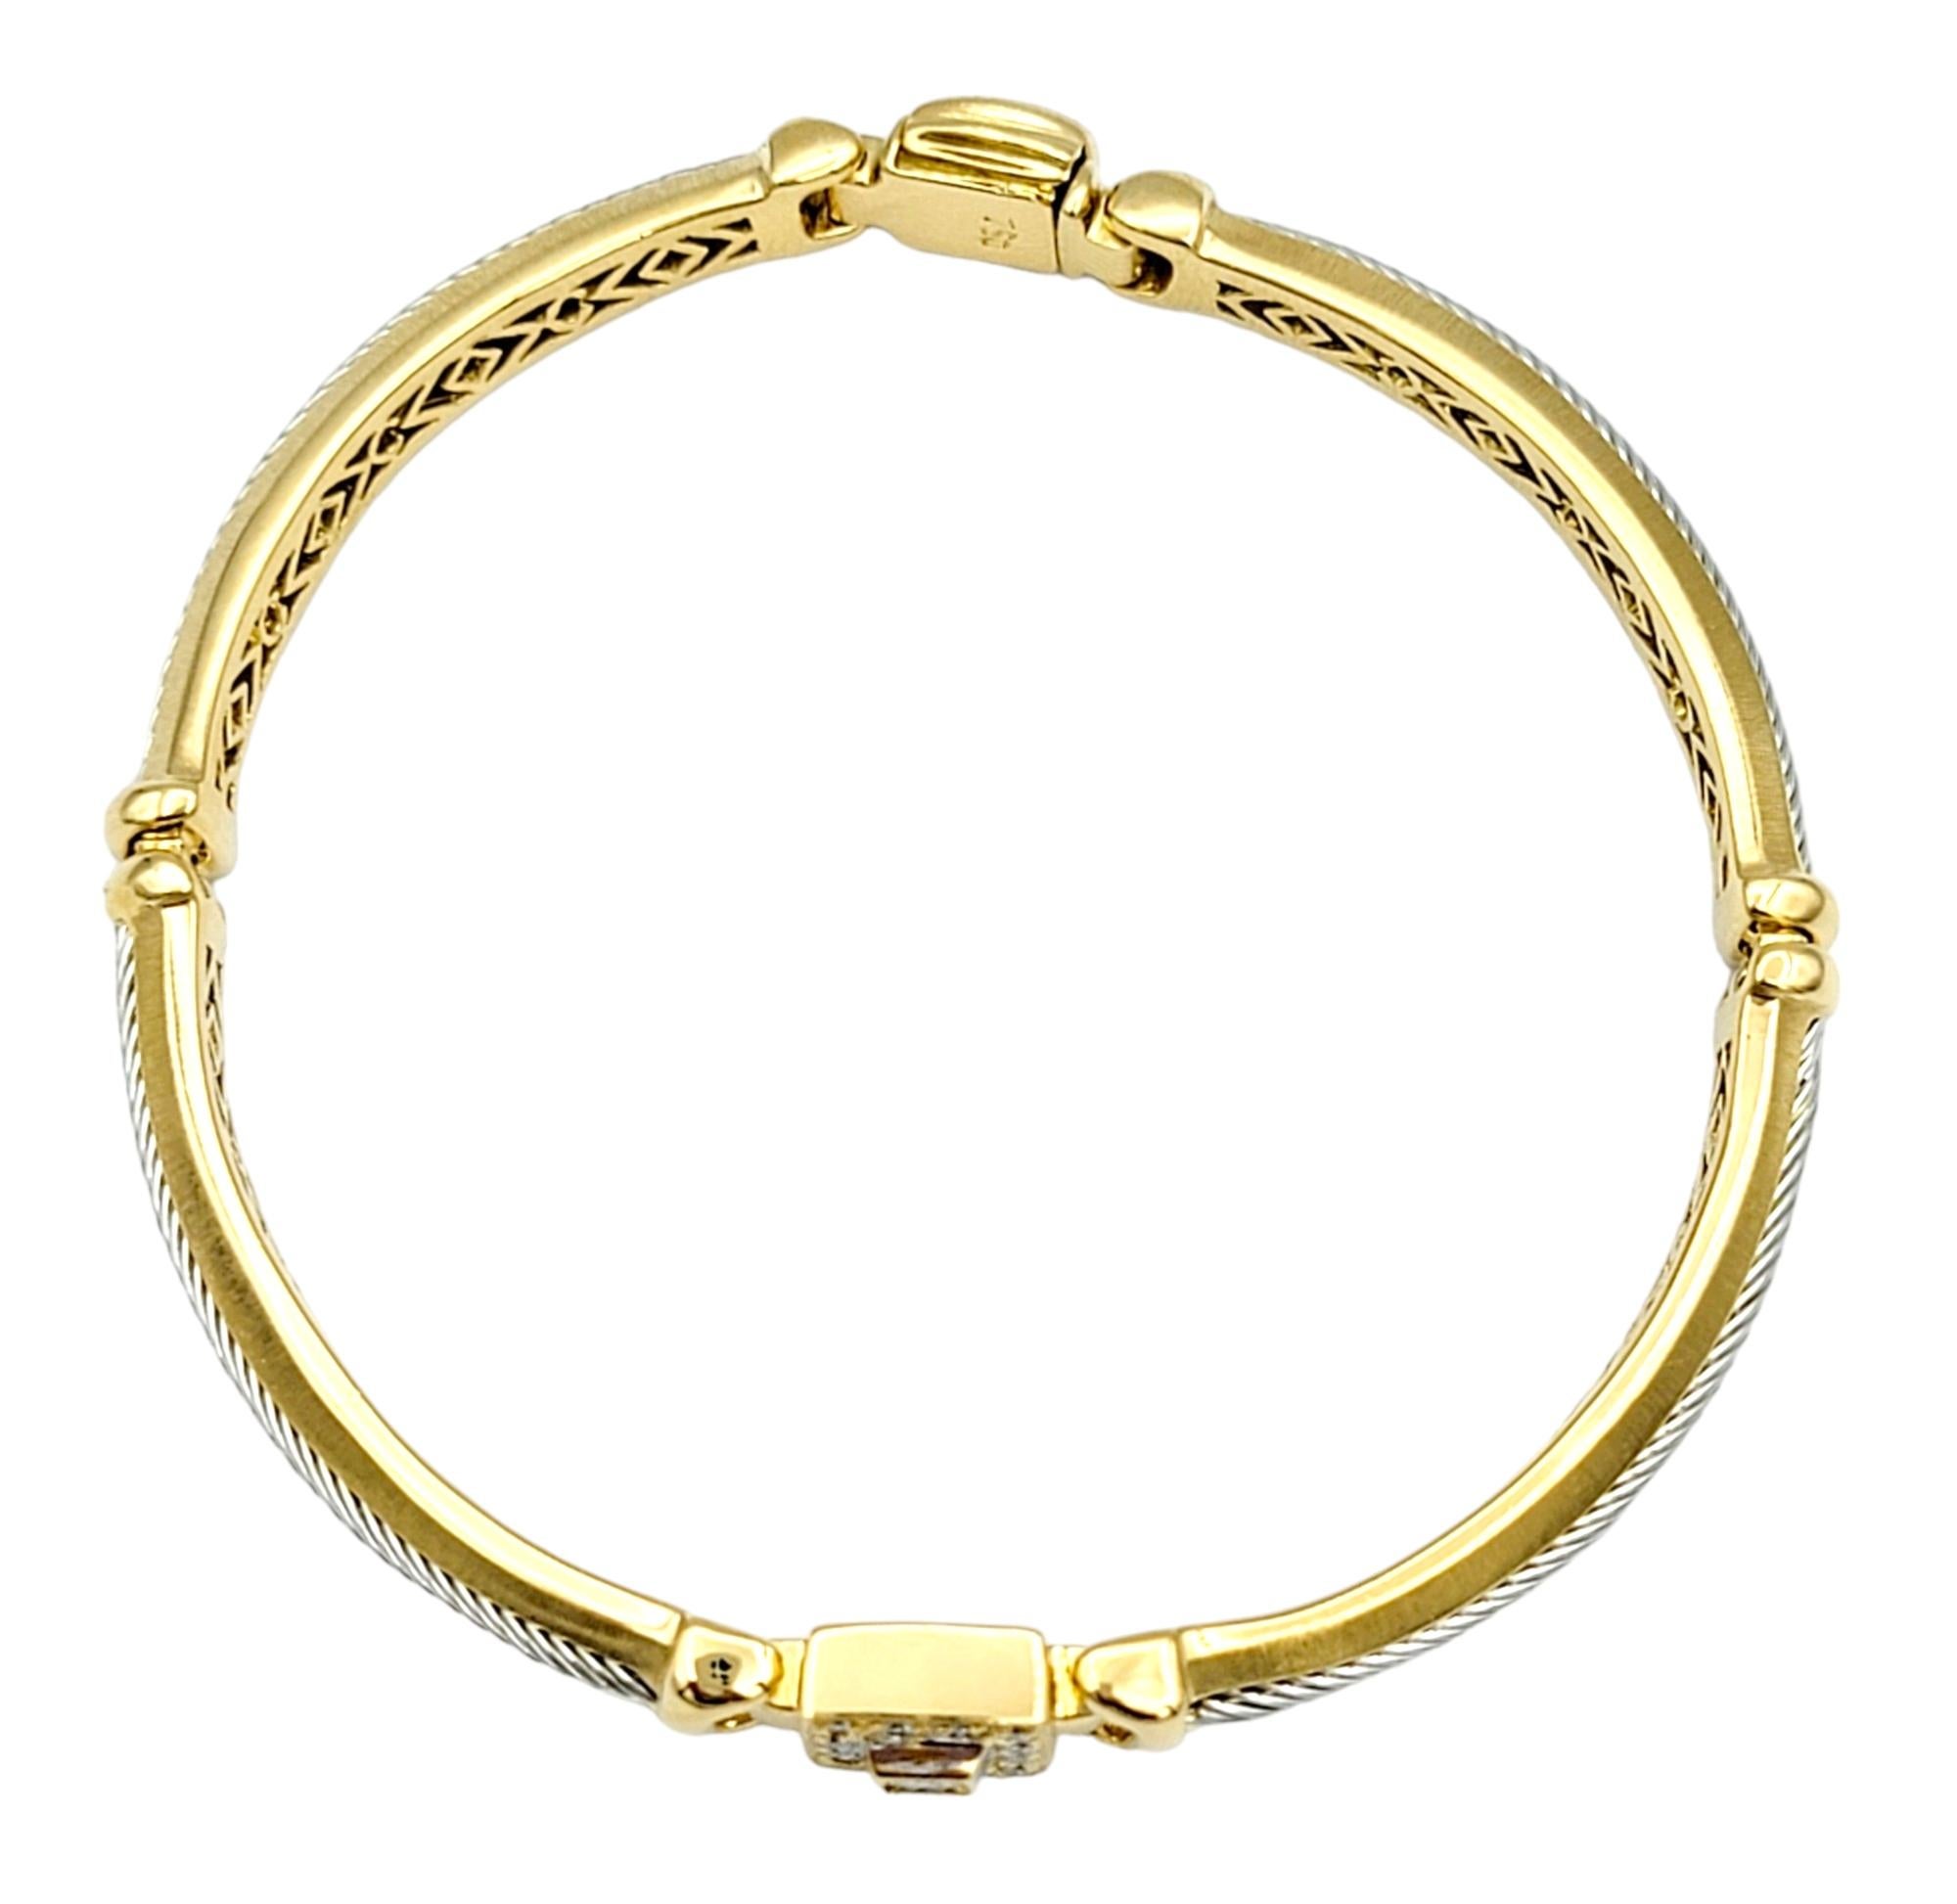 Princess Cut Philippe Charriol Two Tone Bangle Bracelet in 18 Karat Gold and Stainless Steel